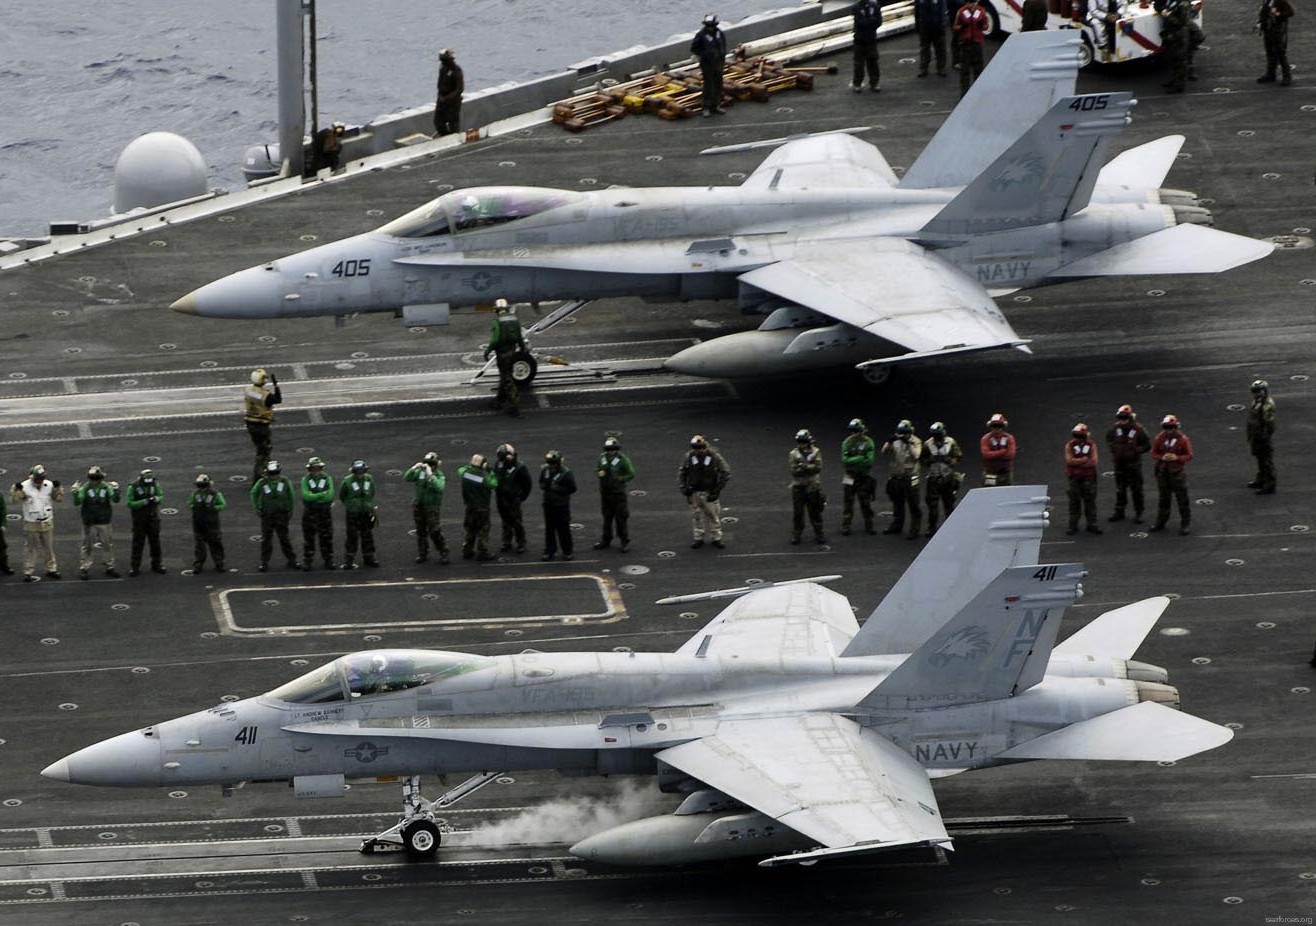 vfa-195 dambusters strike fighter squadron navy f/a-18c hornet carrier air wing cvw-5 uss kitty hawk cv-63 53